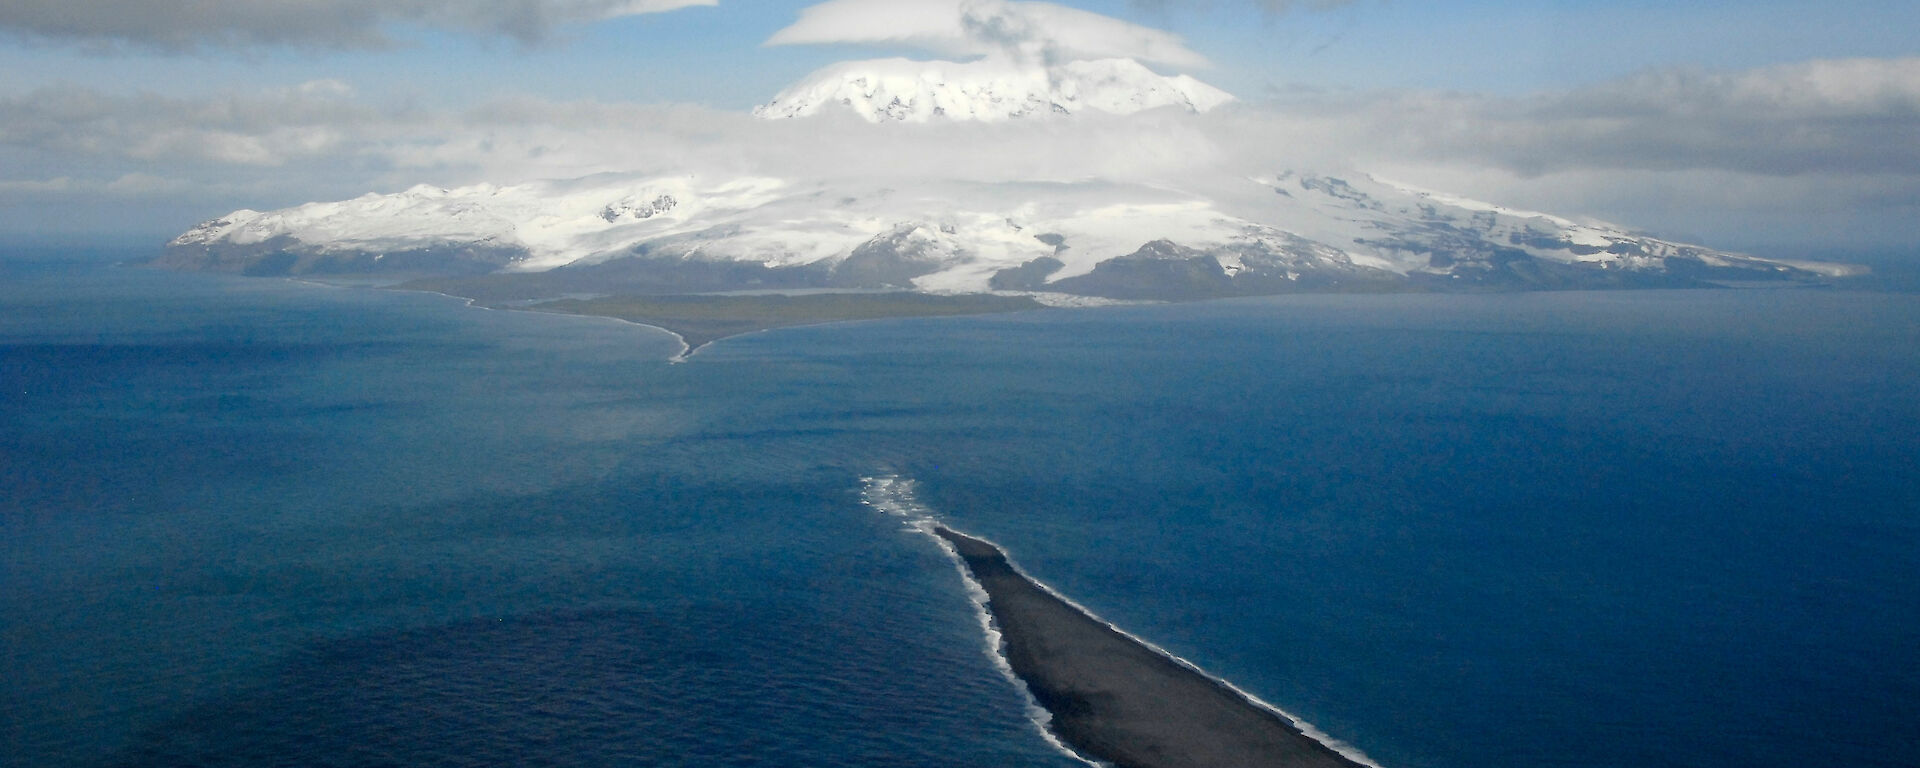 A photo from the air of a small island in the foreground and the snowy topped Big Ben on Heard Island in the background.